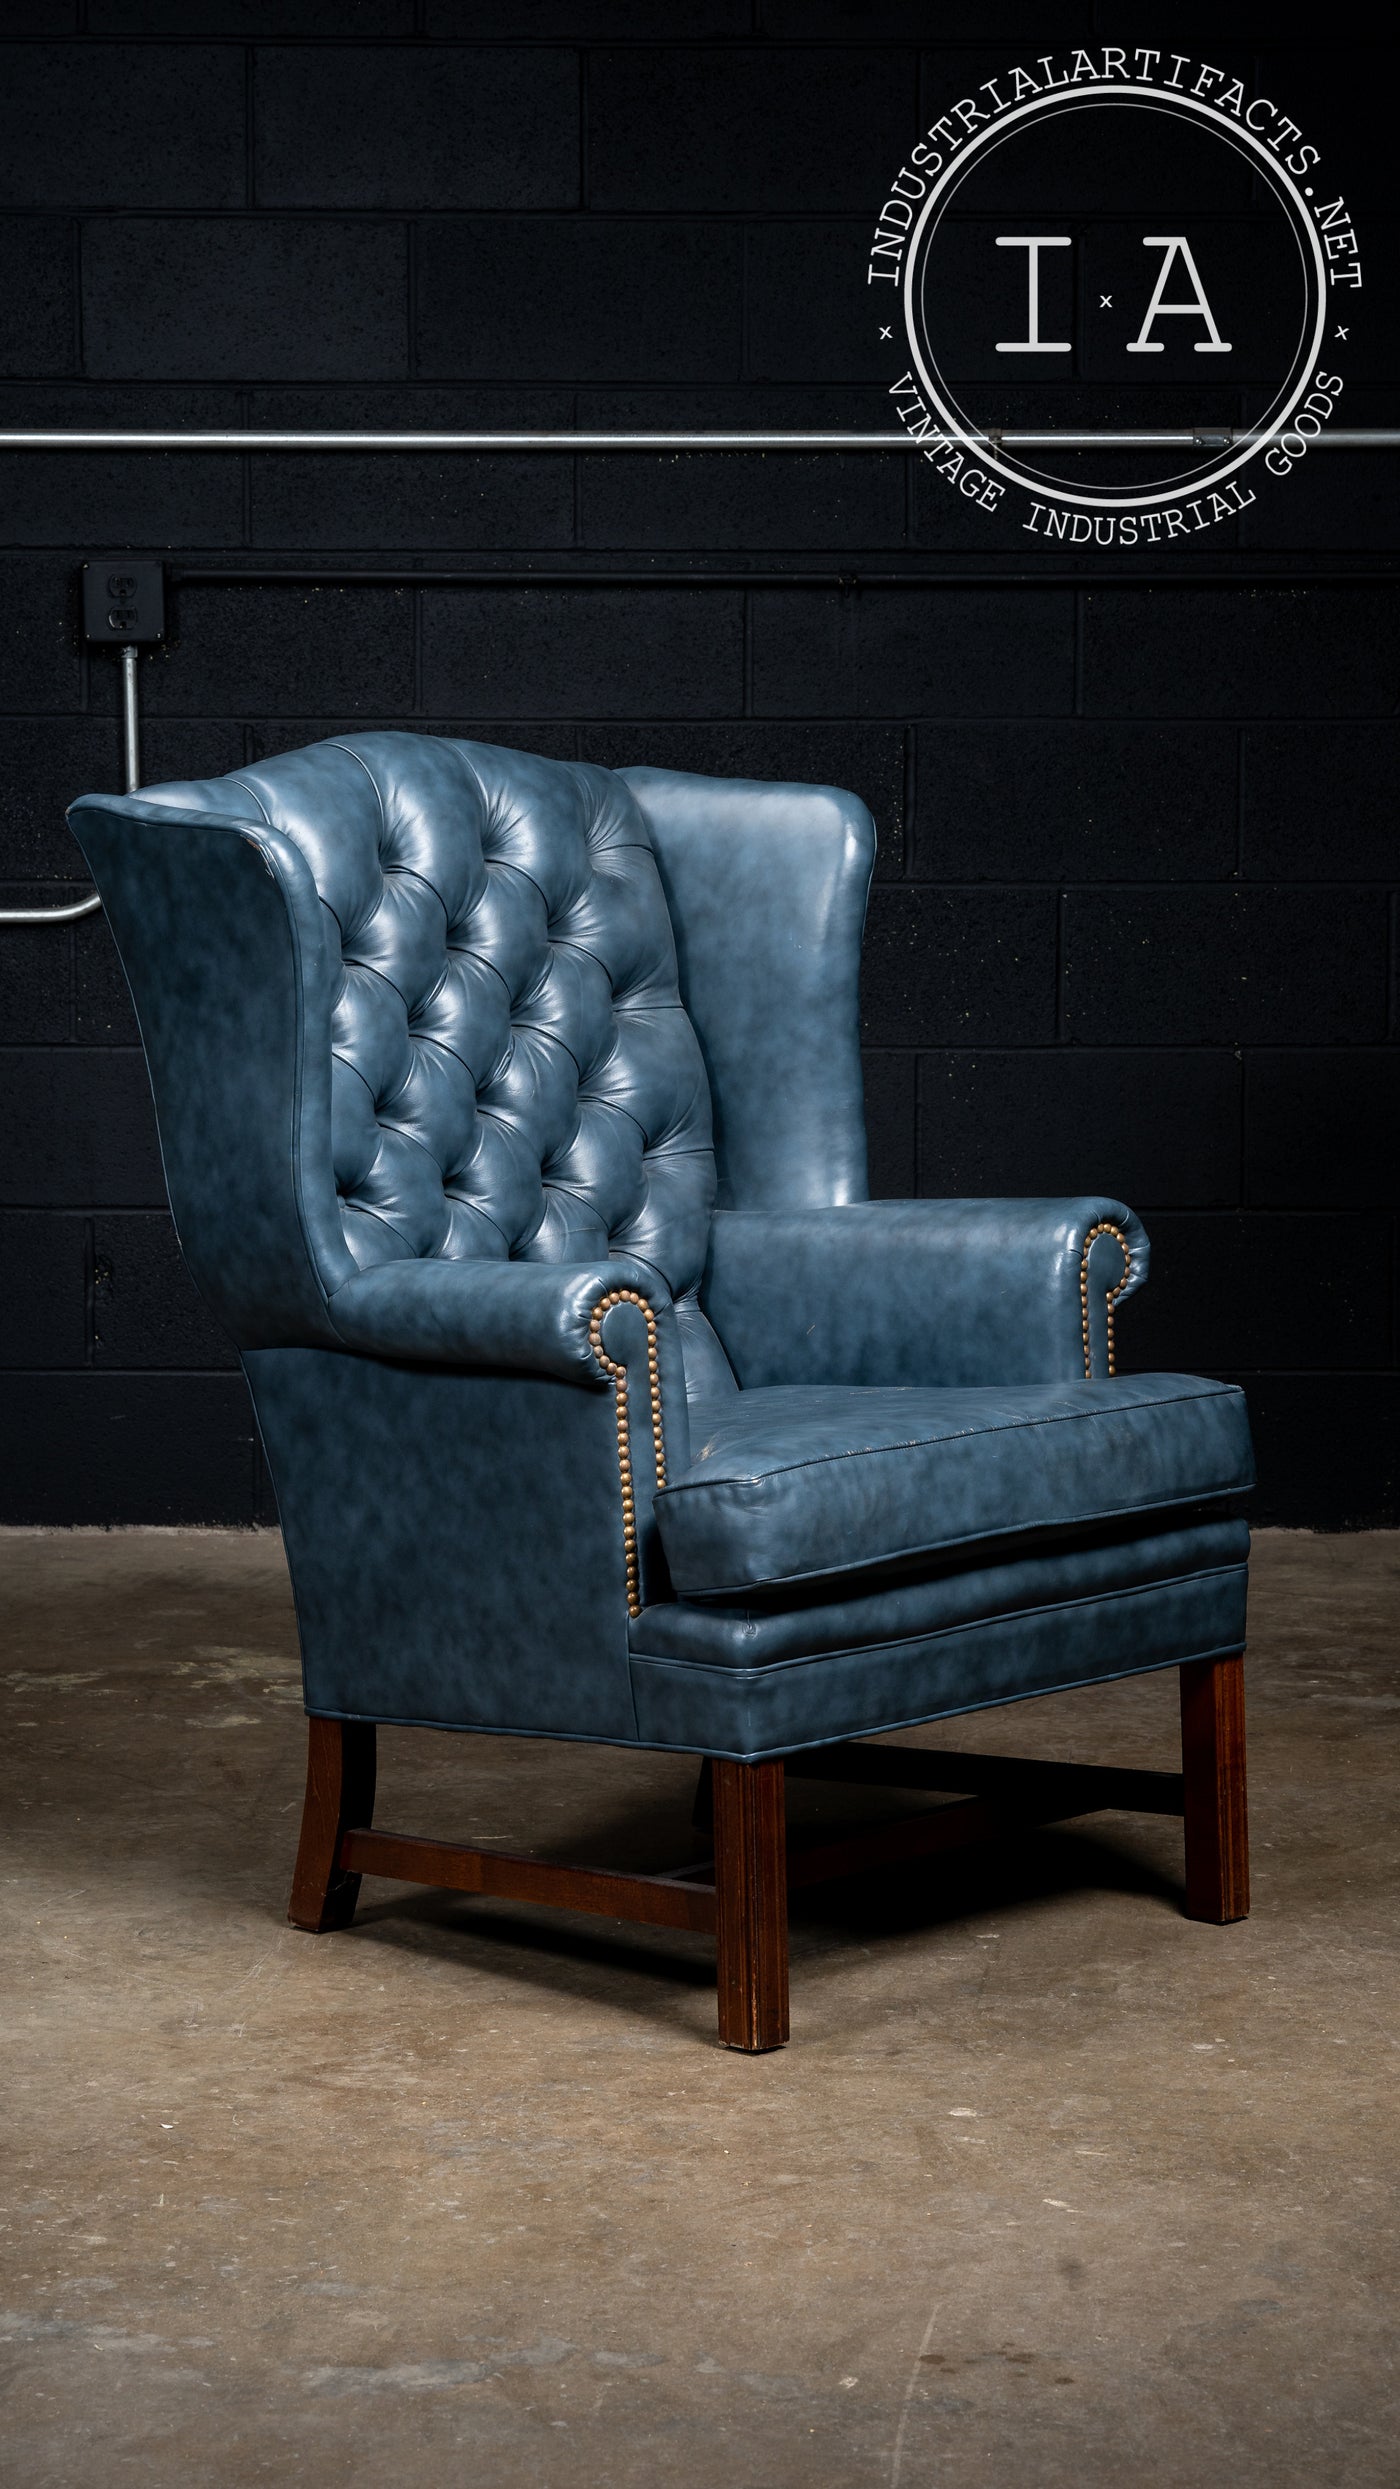 Vintage Tufted Wingback Chairs in Blue - A Pair